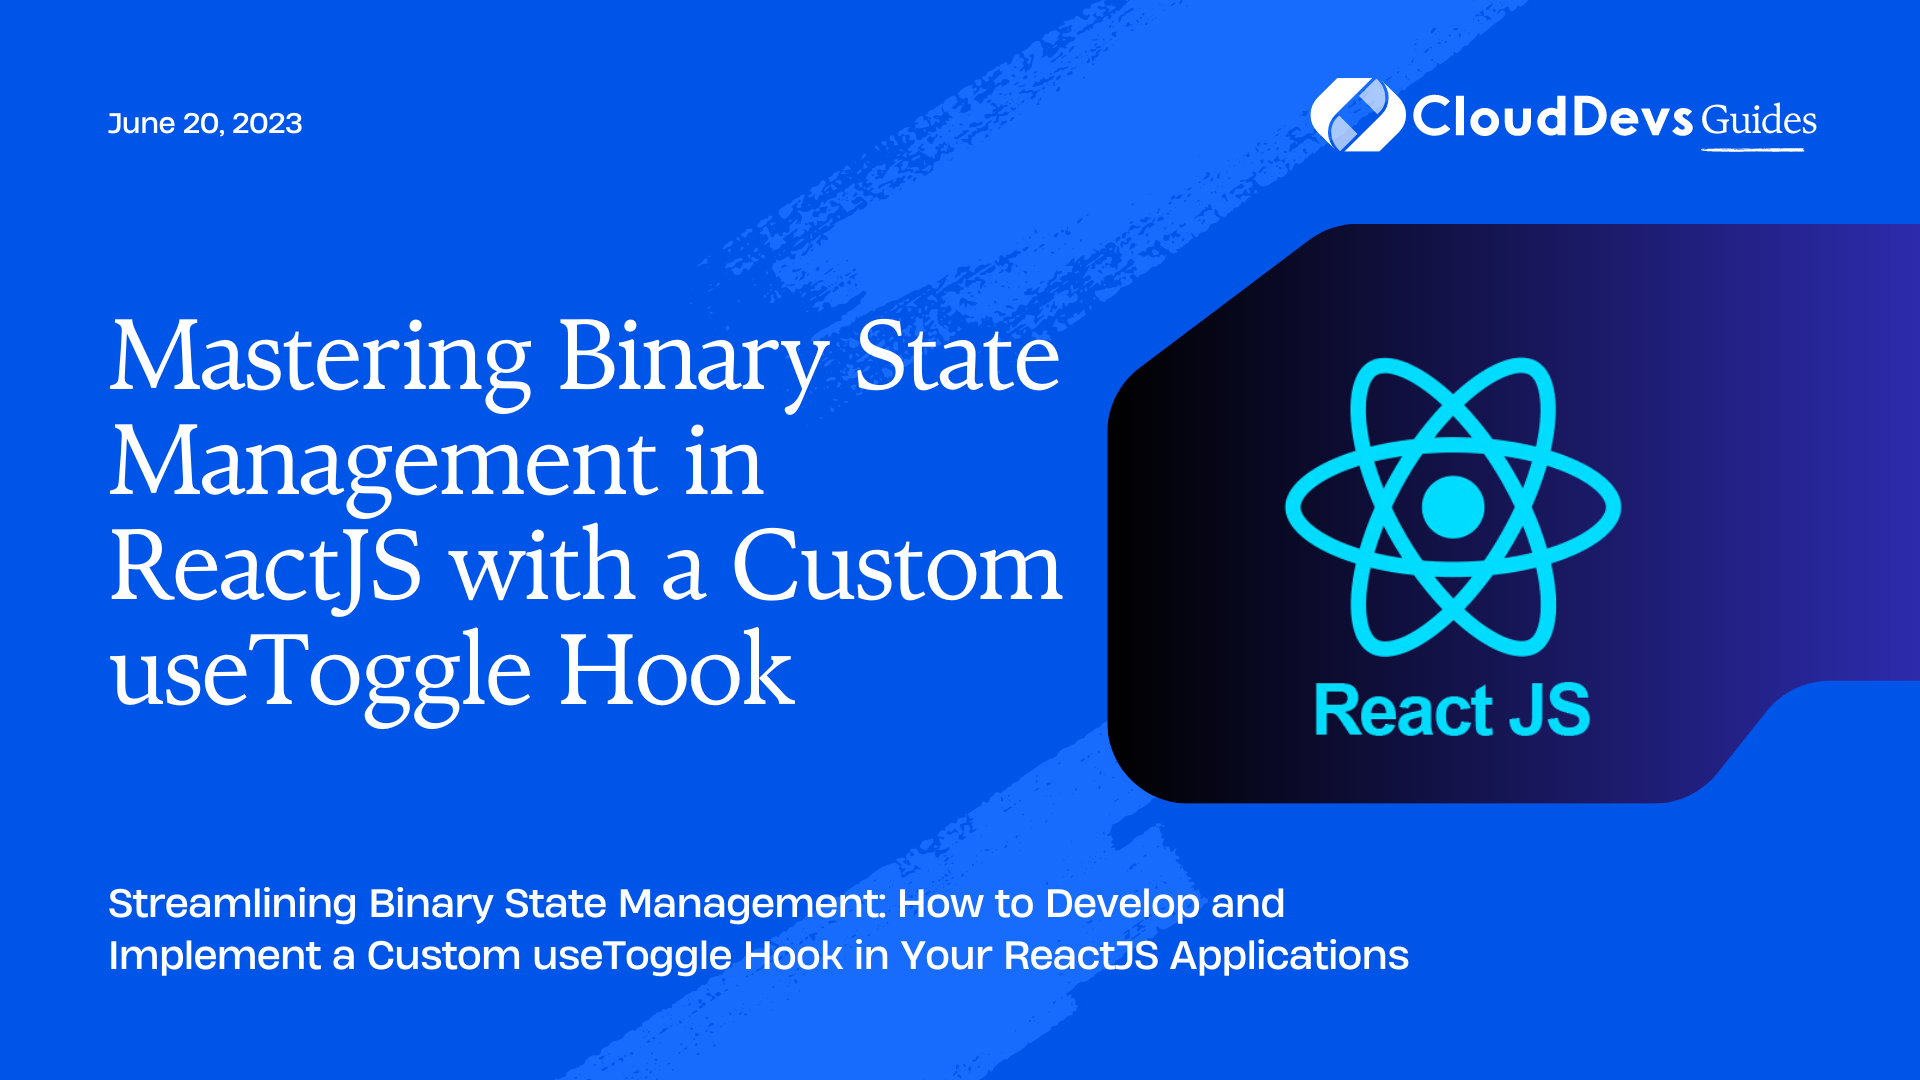 Mastering Binary State Management in ReactJS with a Custom useToggle Hook